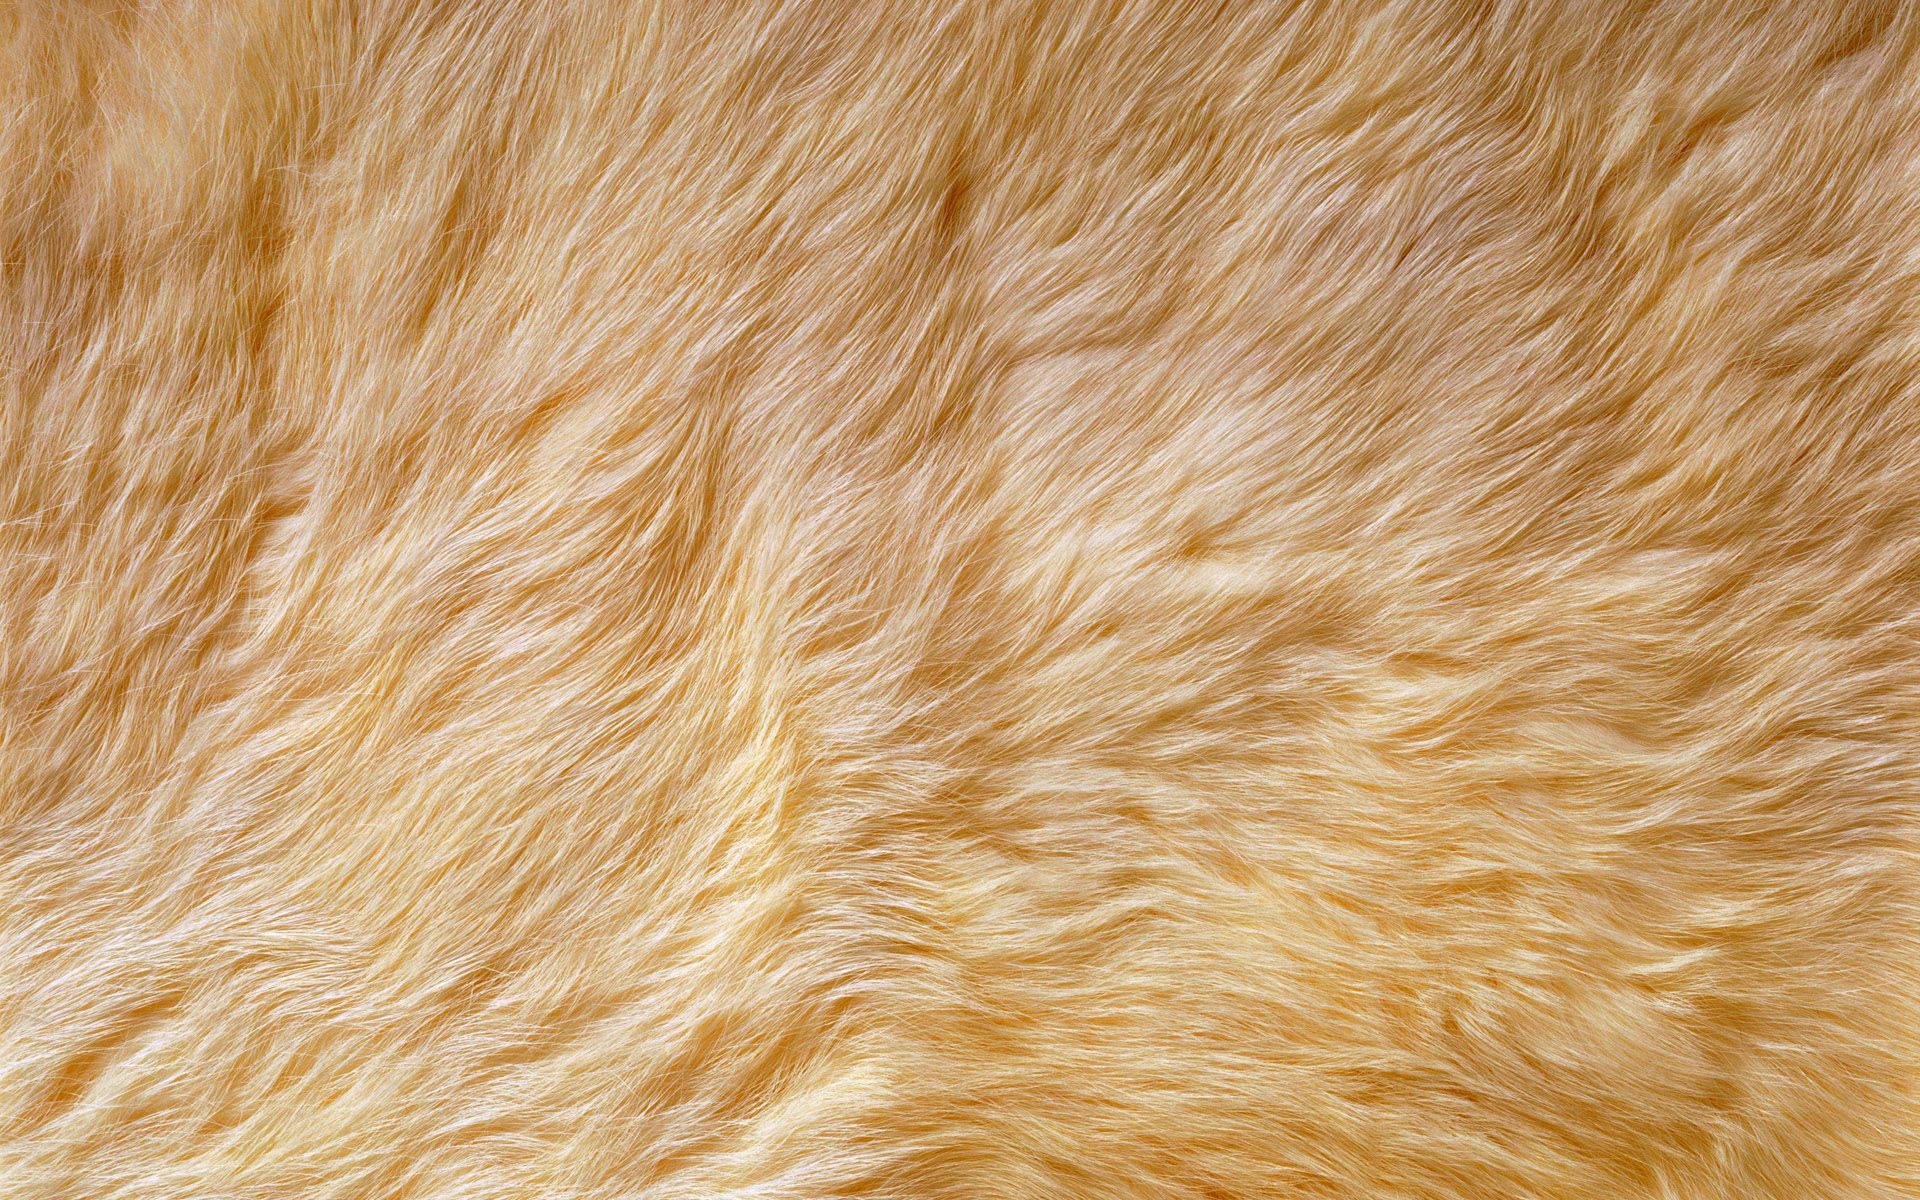 Animal Fur With Soft Texture Wallpaper